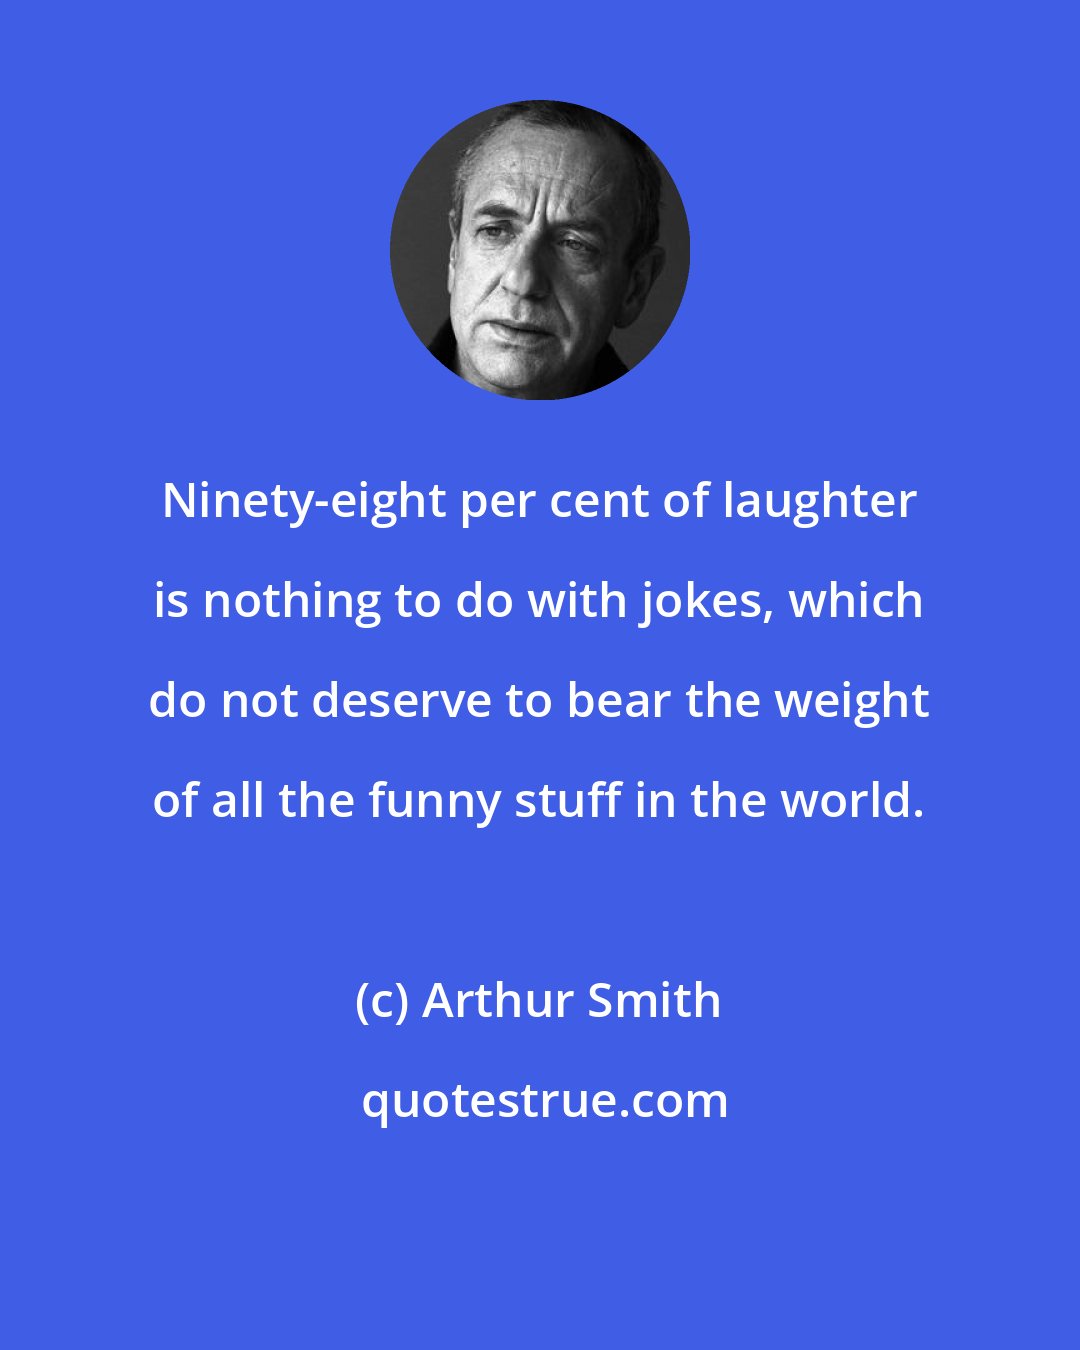 Arthur Smith: Ninety-eight per cent of laughter is nothing to do with jokes, which do not deserve to bear the weight of all the funny stuff in the world.